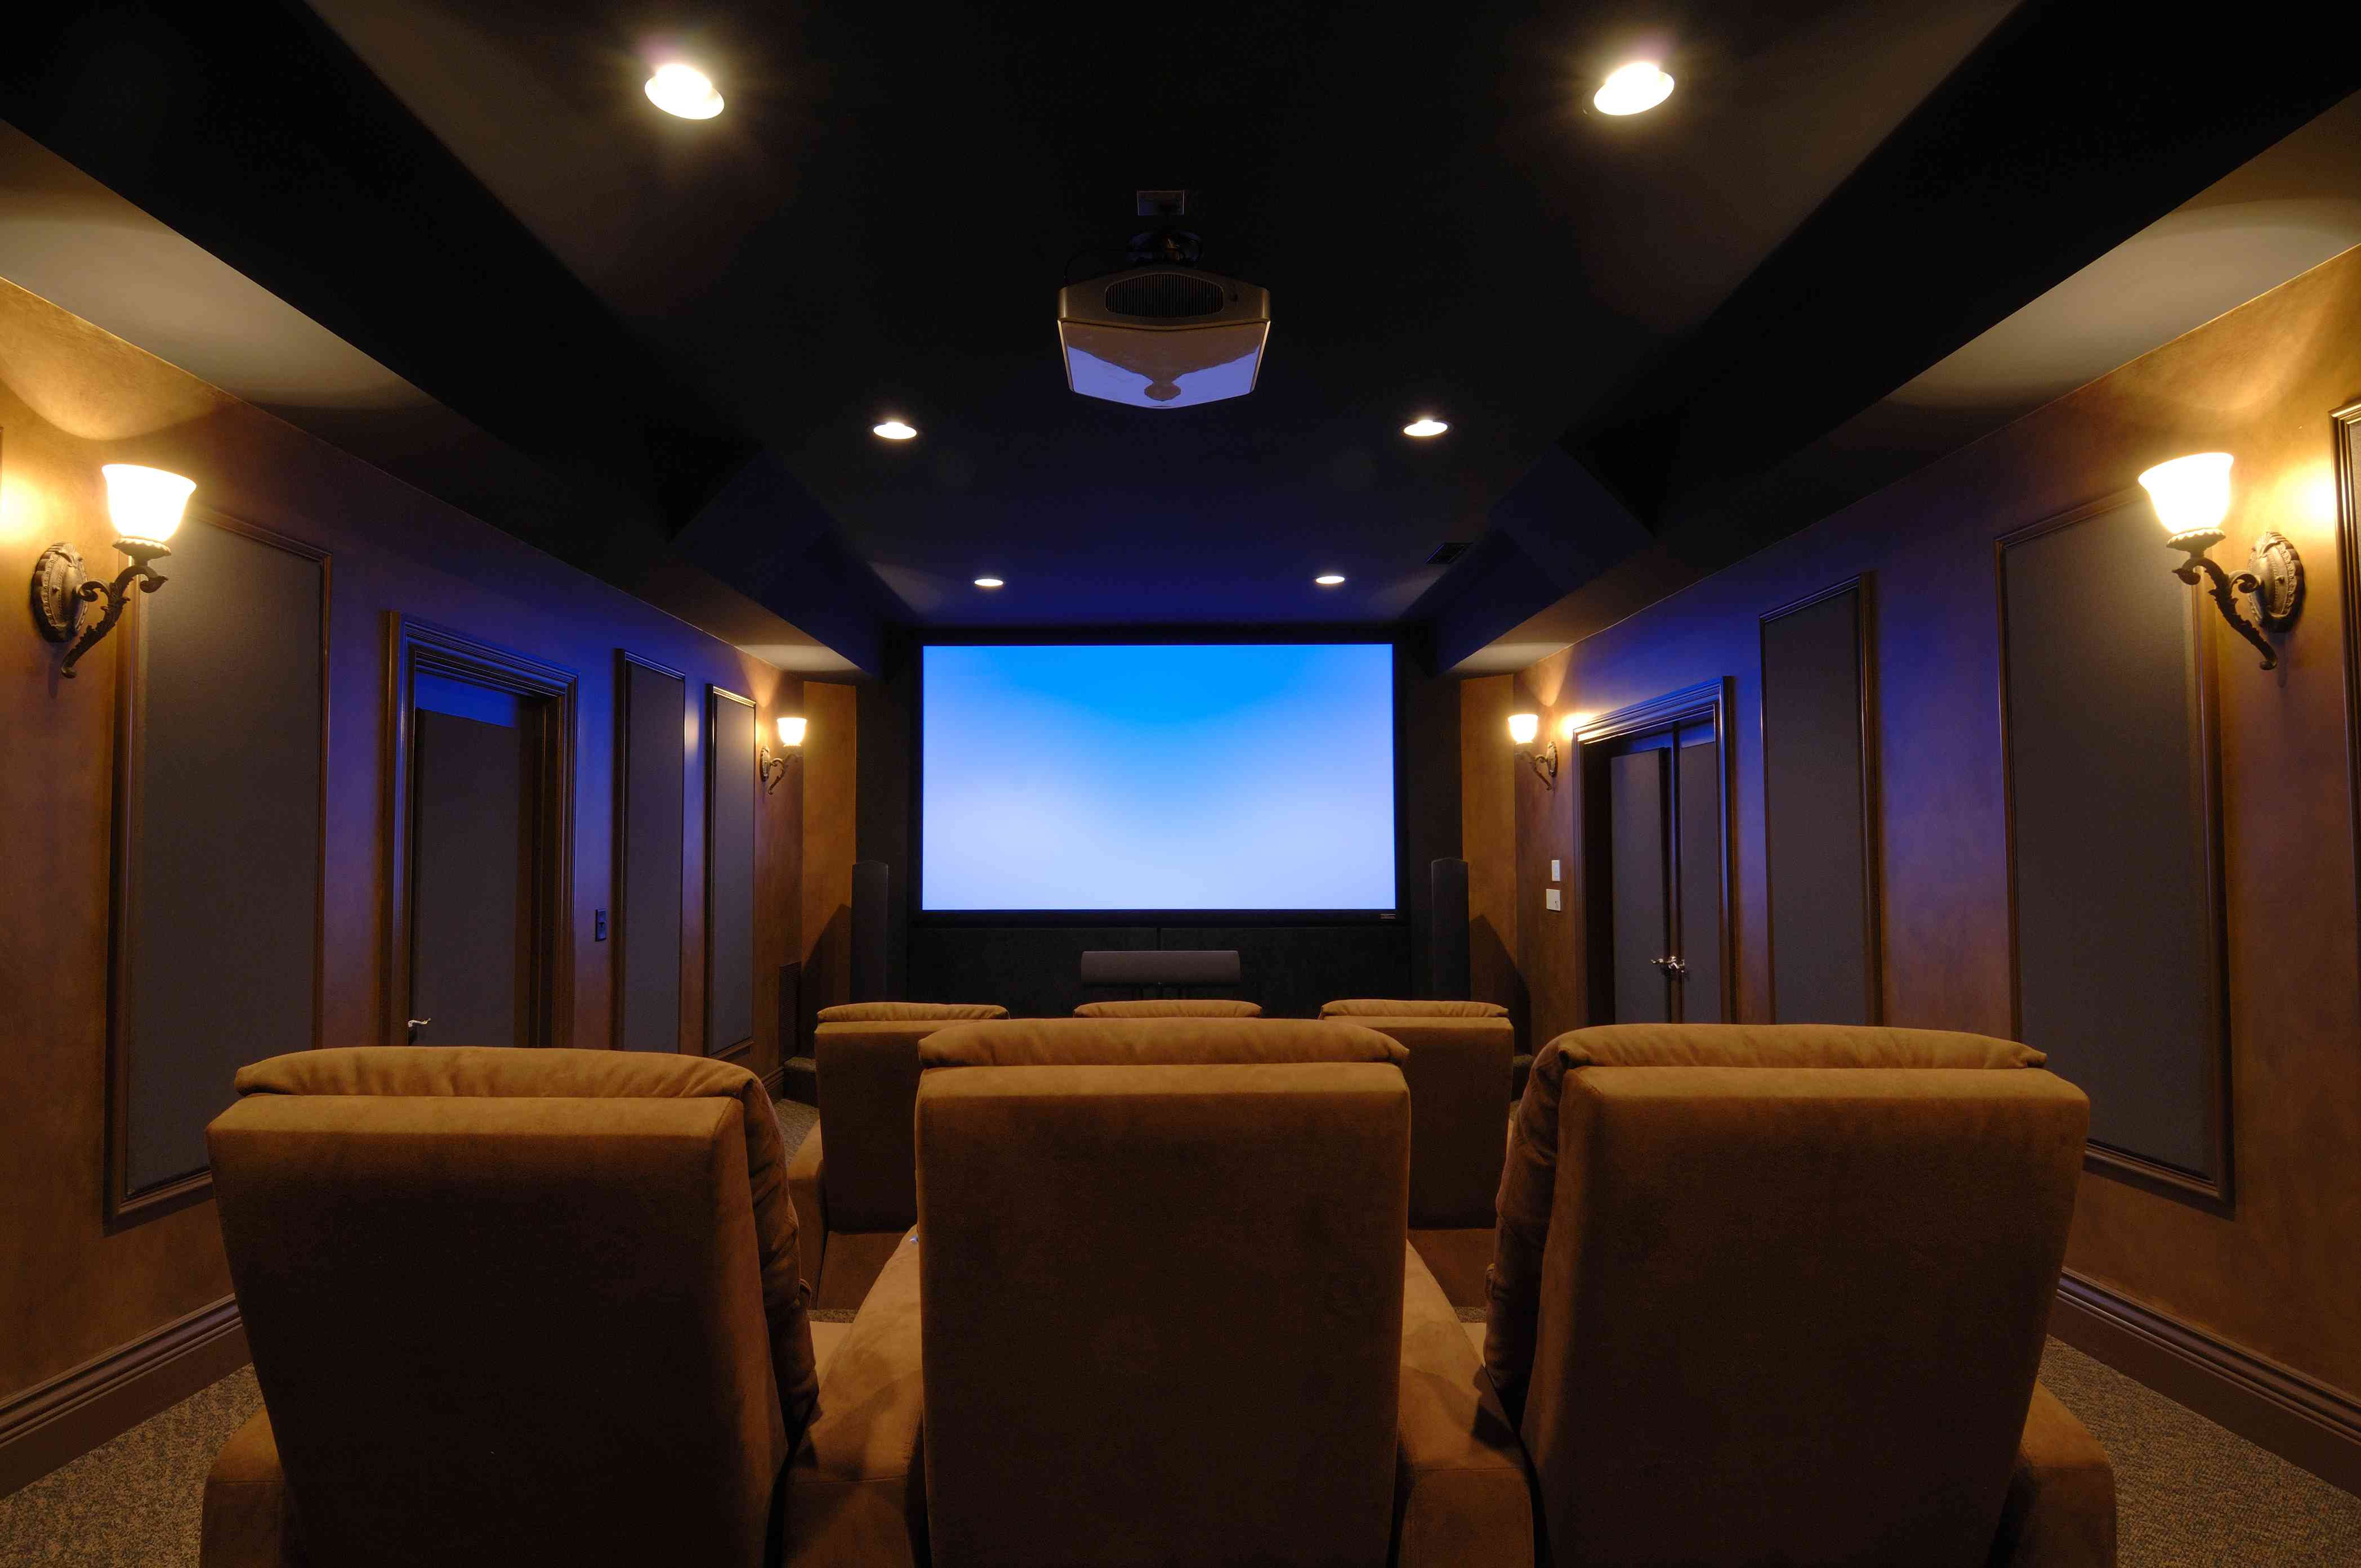 How Much Ceiling Height Do I Need To Install A Home Theater Projector